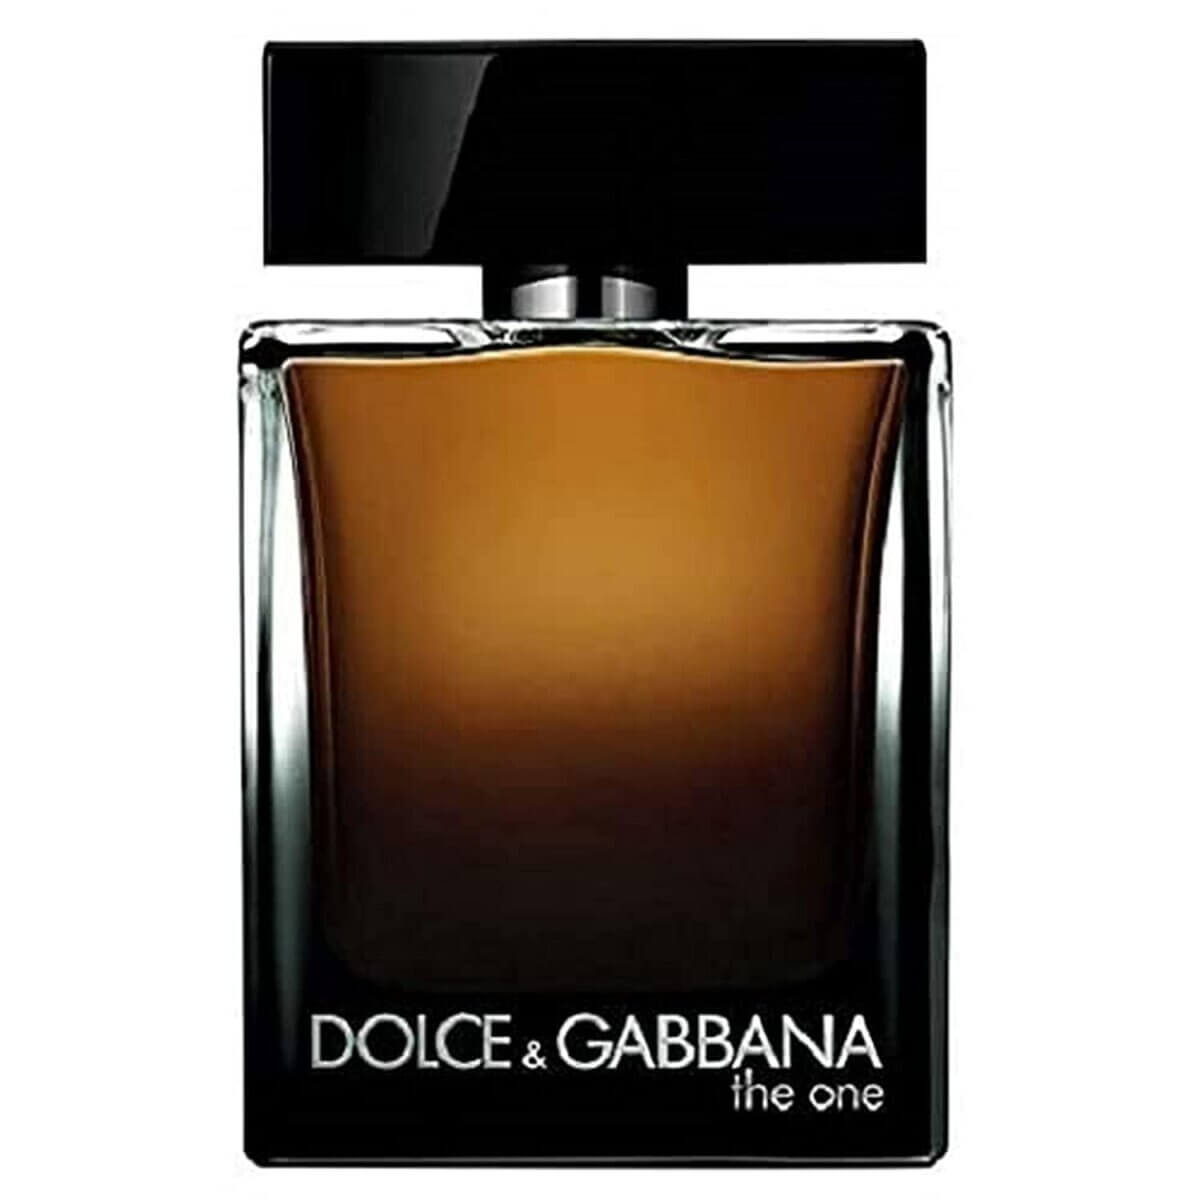 Best Winter Colognes: Top 5 Fragrances Most Recommended By Experts